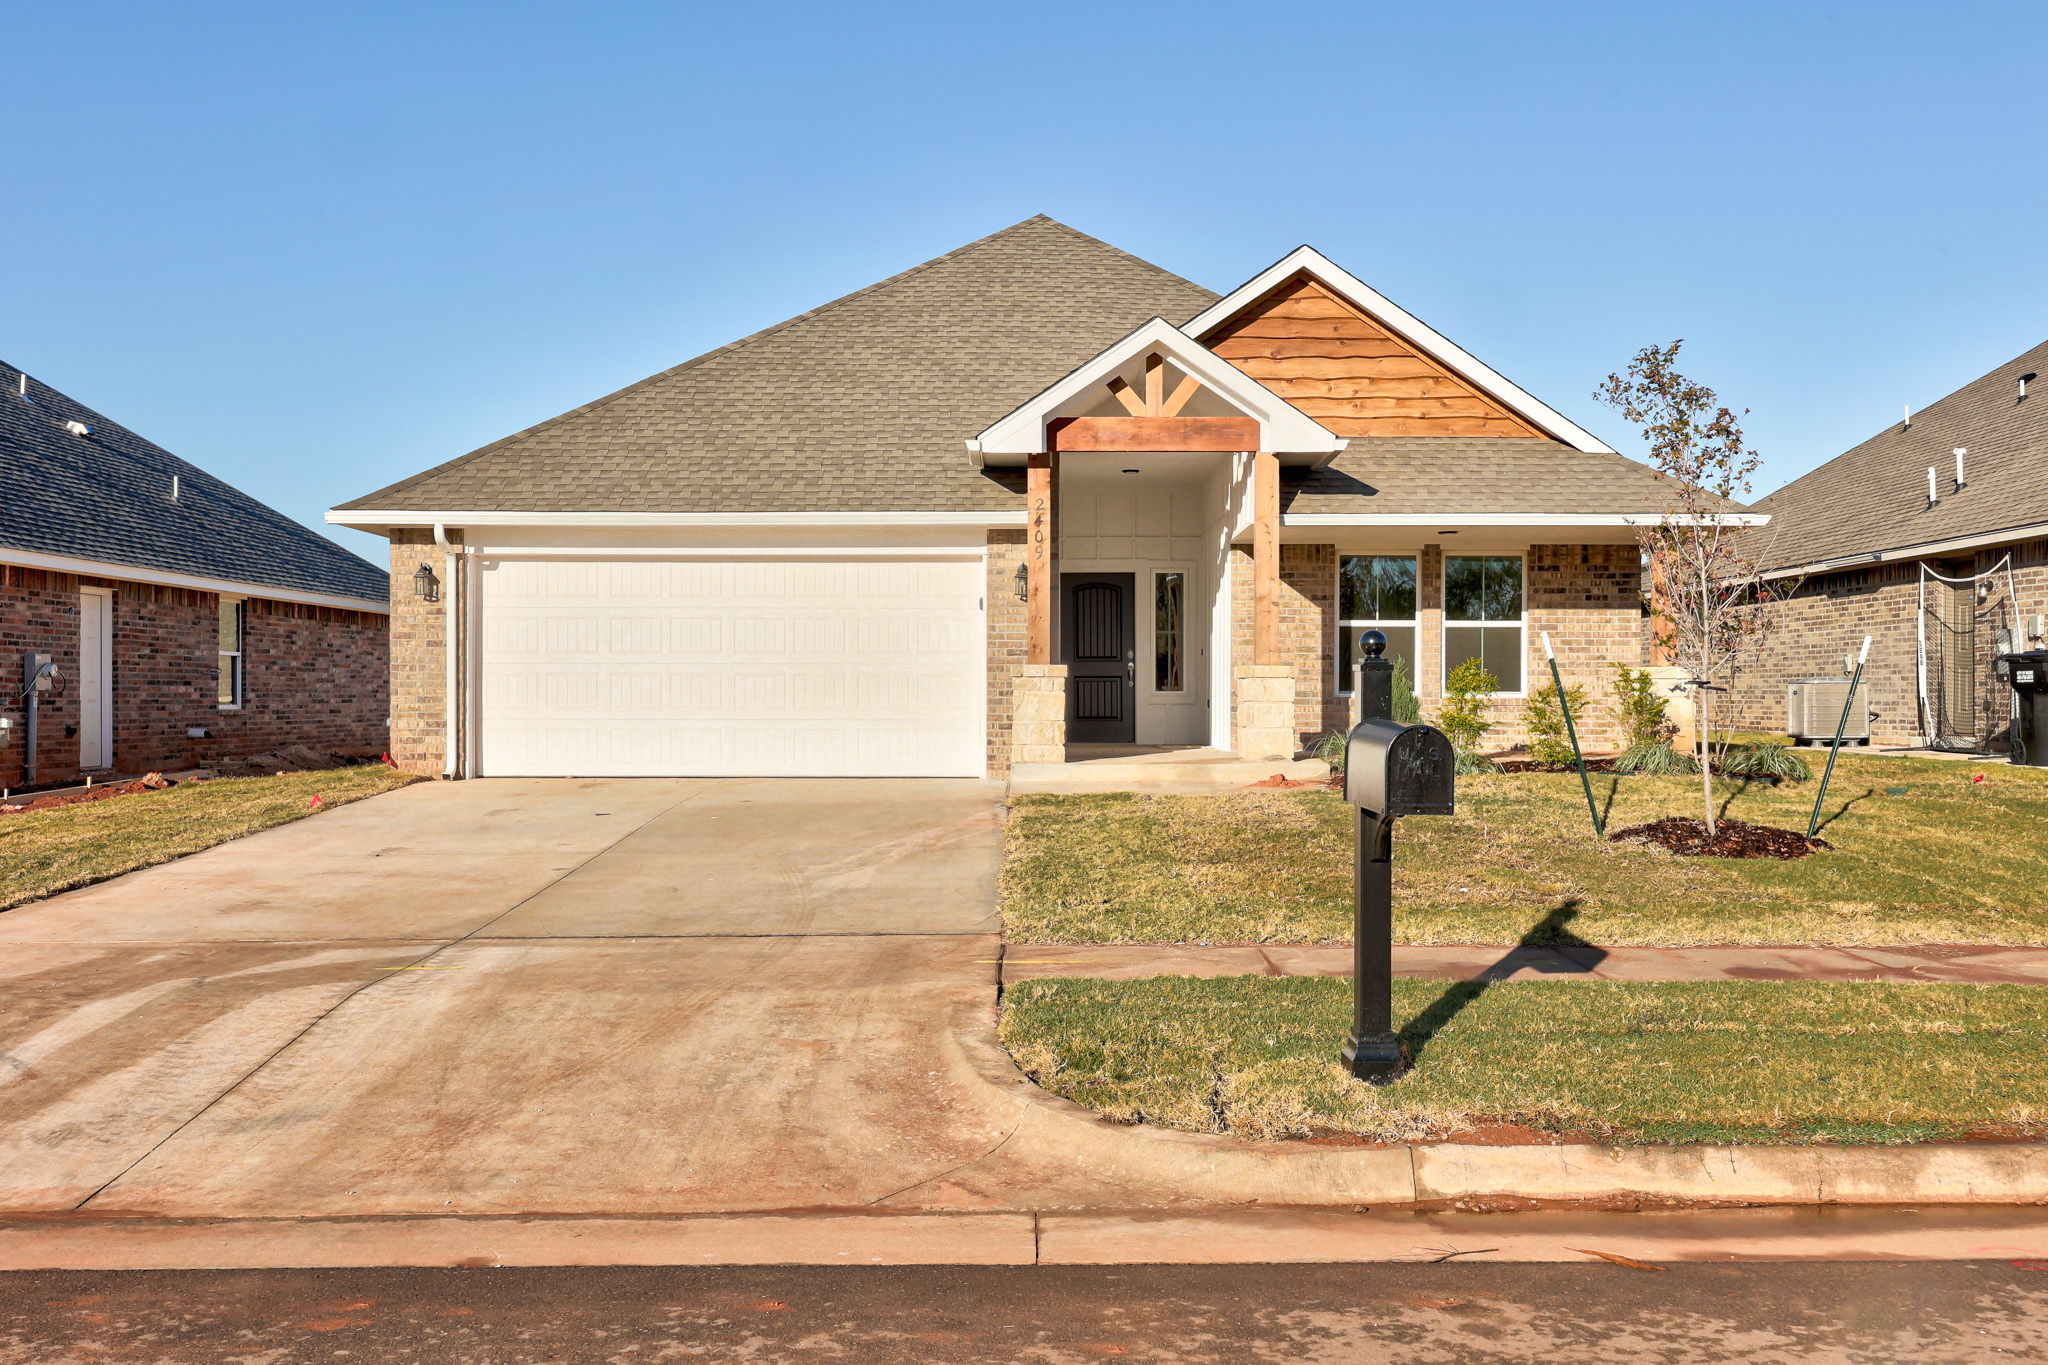 2409 Creekview Trail, Moore, Oklahoma 73160, 3 Bedrooms Bedrooms, ,2 BathroomsBathrooms,House,For Sale,Creekview Trail,1412